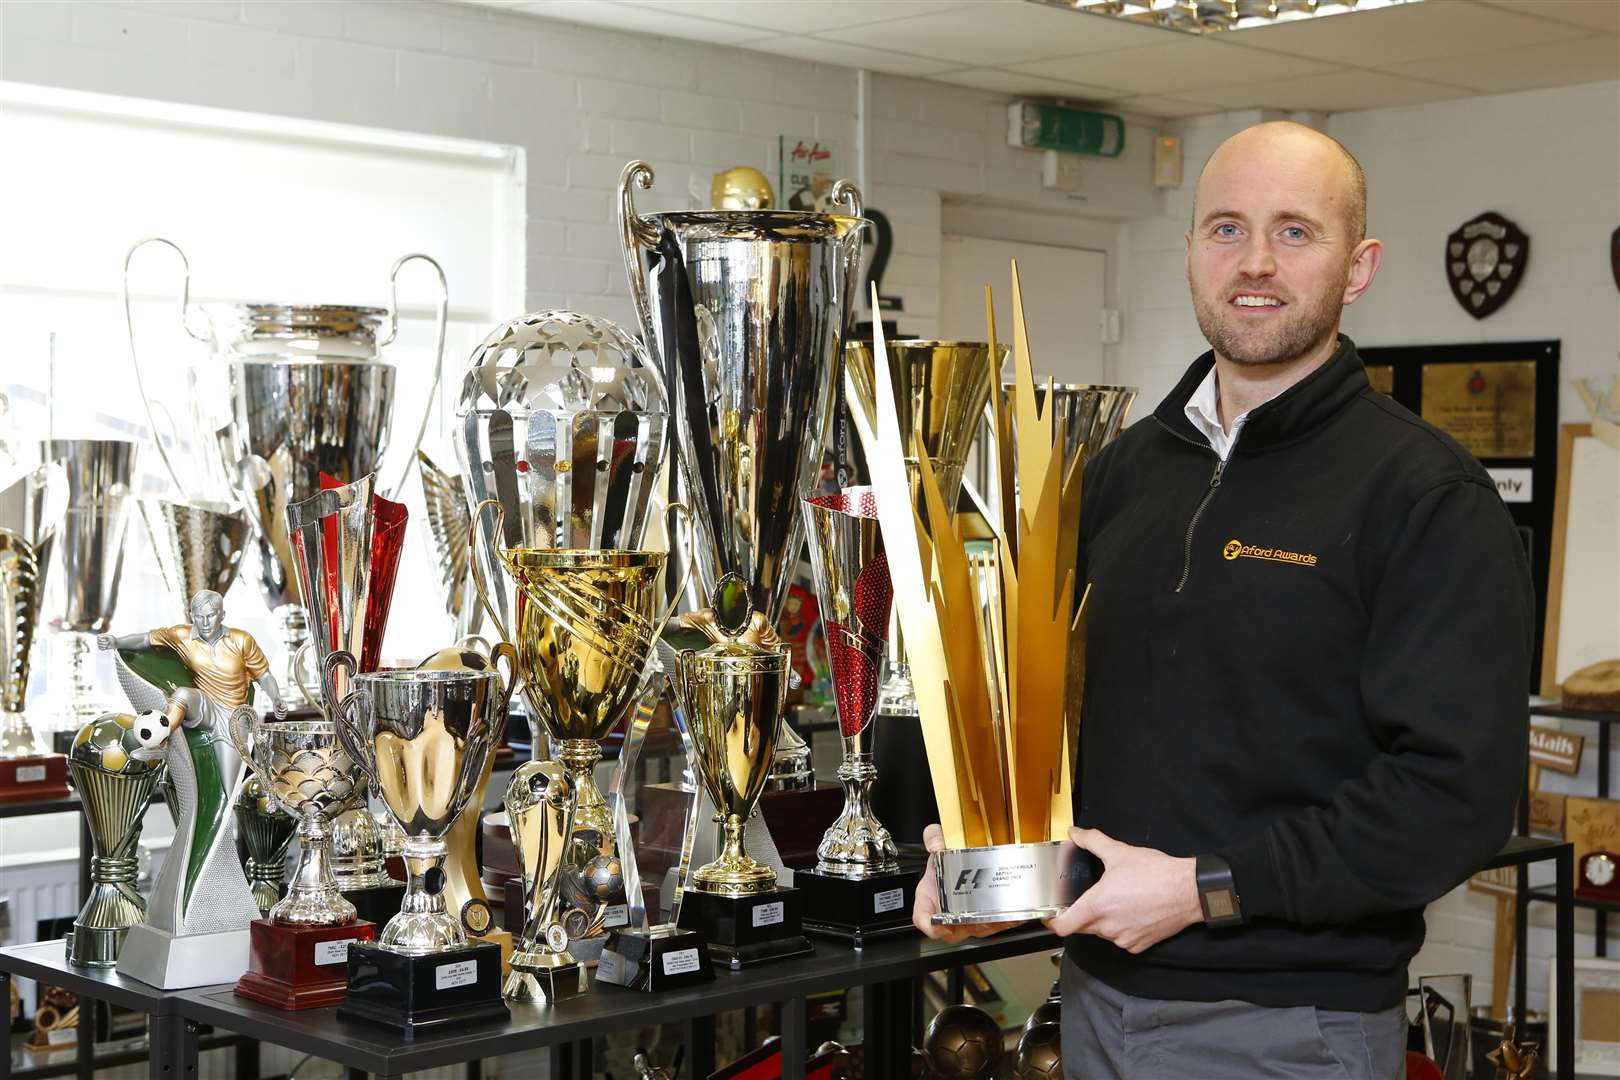 Jon Ford from Aford Awards with some of the awards his company produces